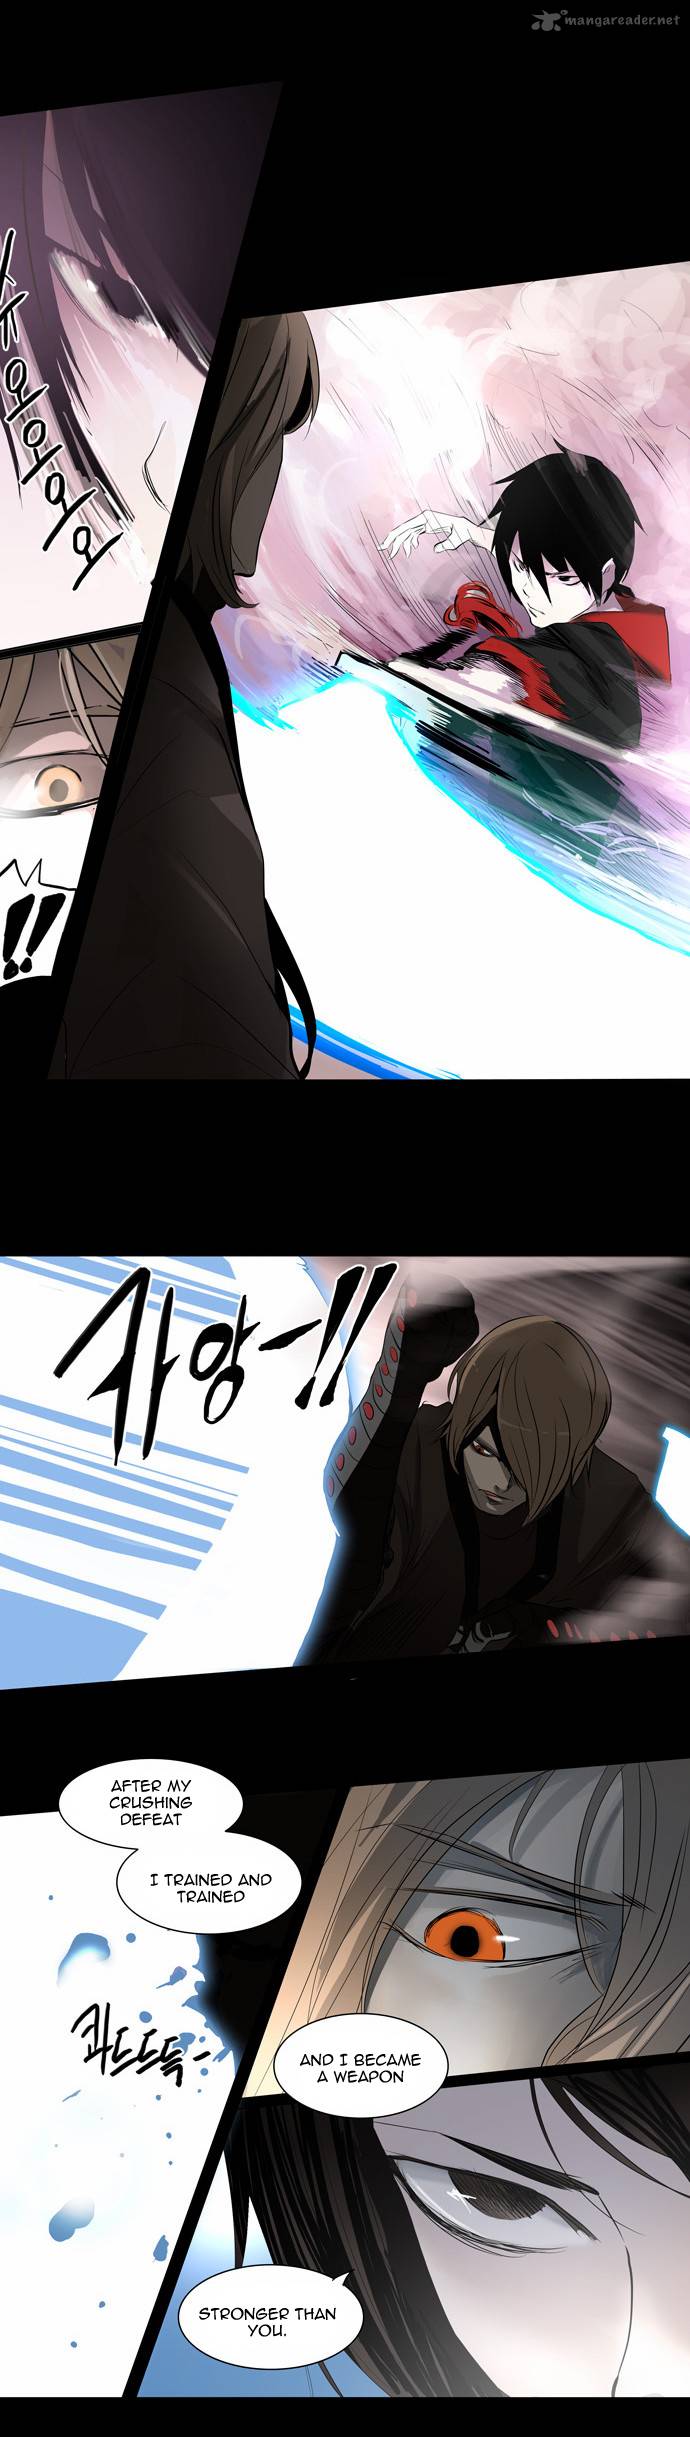 Tower Of God 141 21